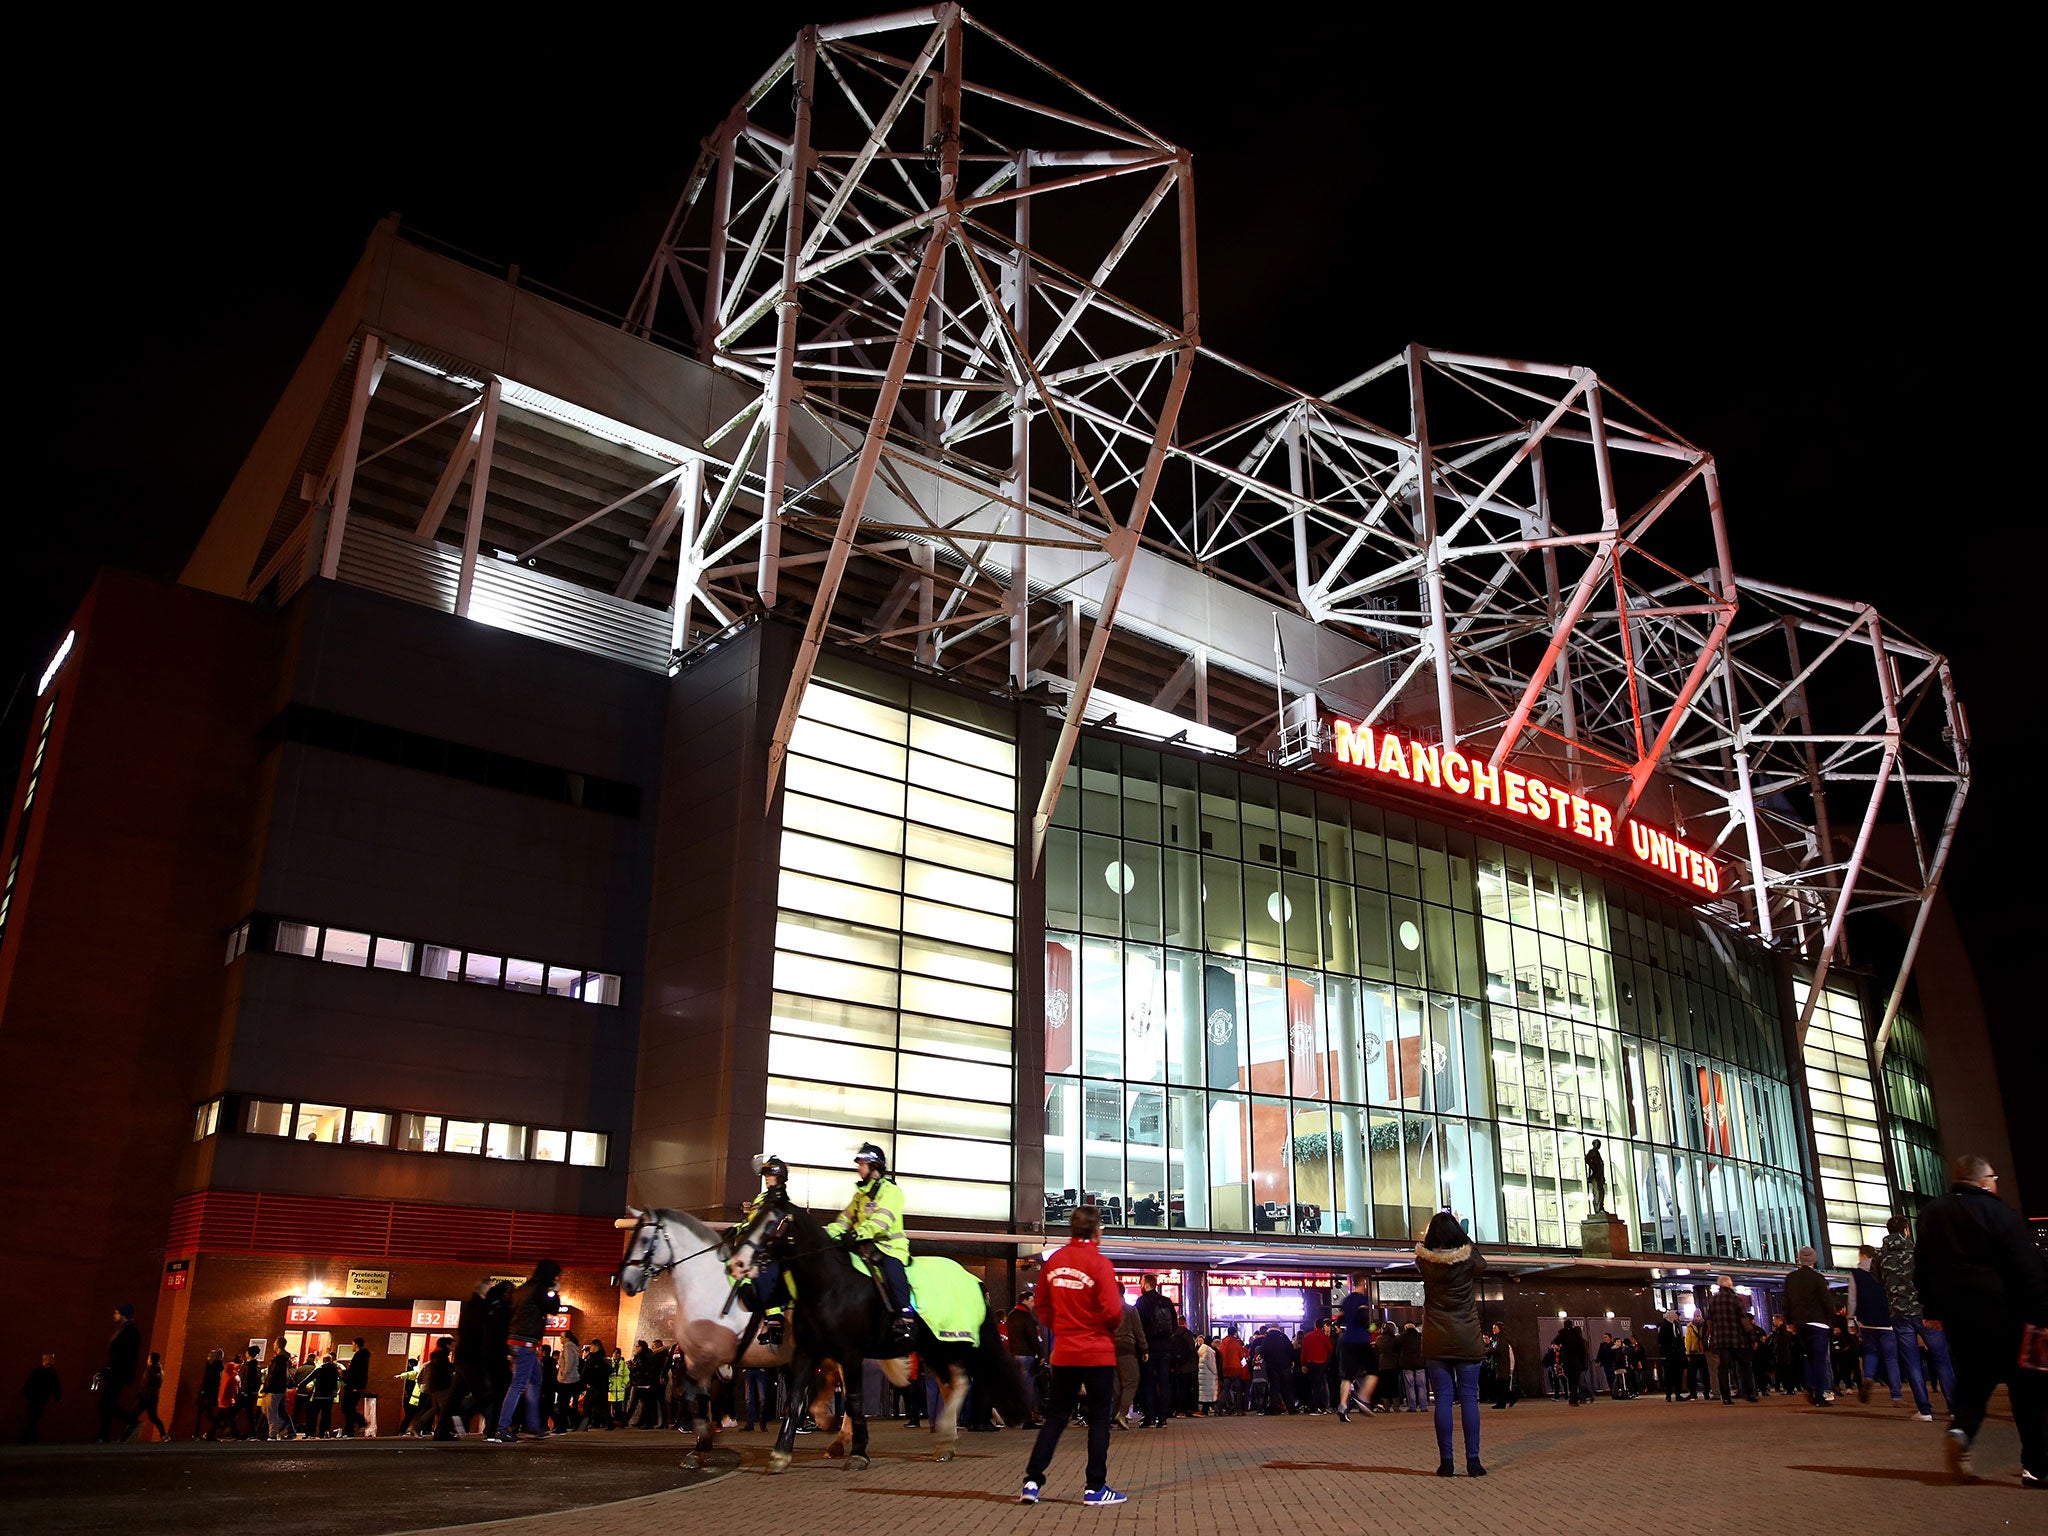 Manchester United entertain Hull at Old Trafford